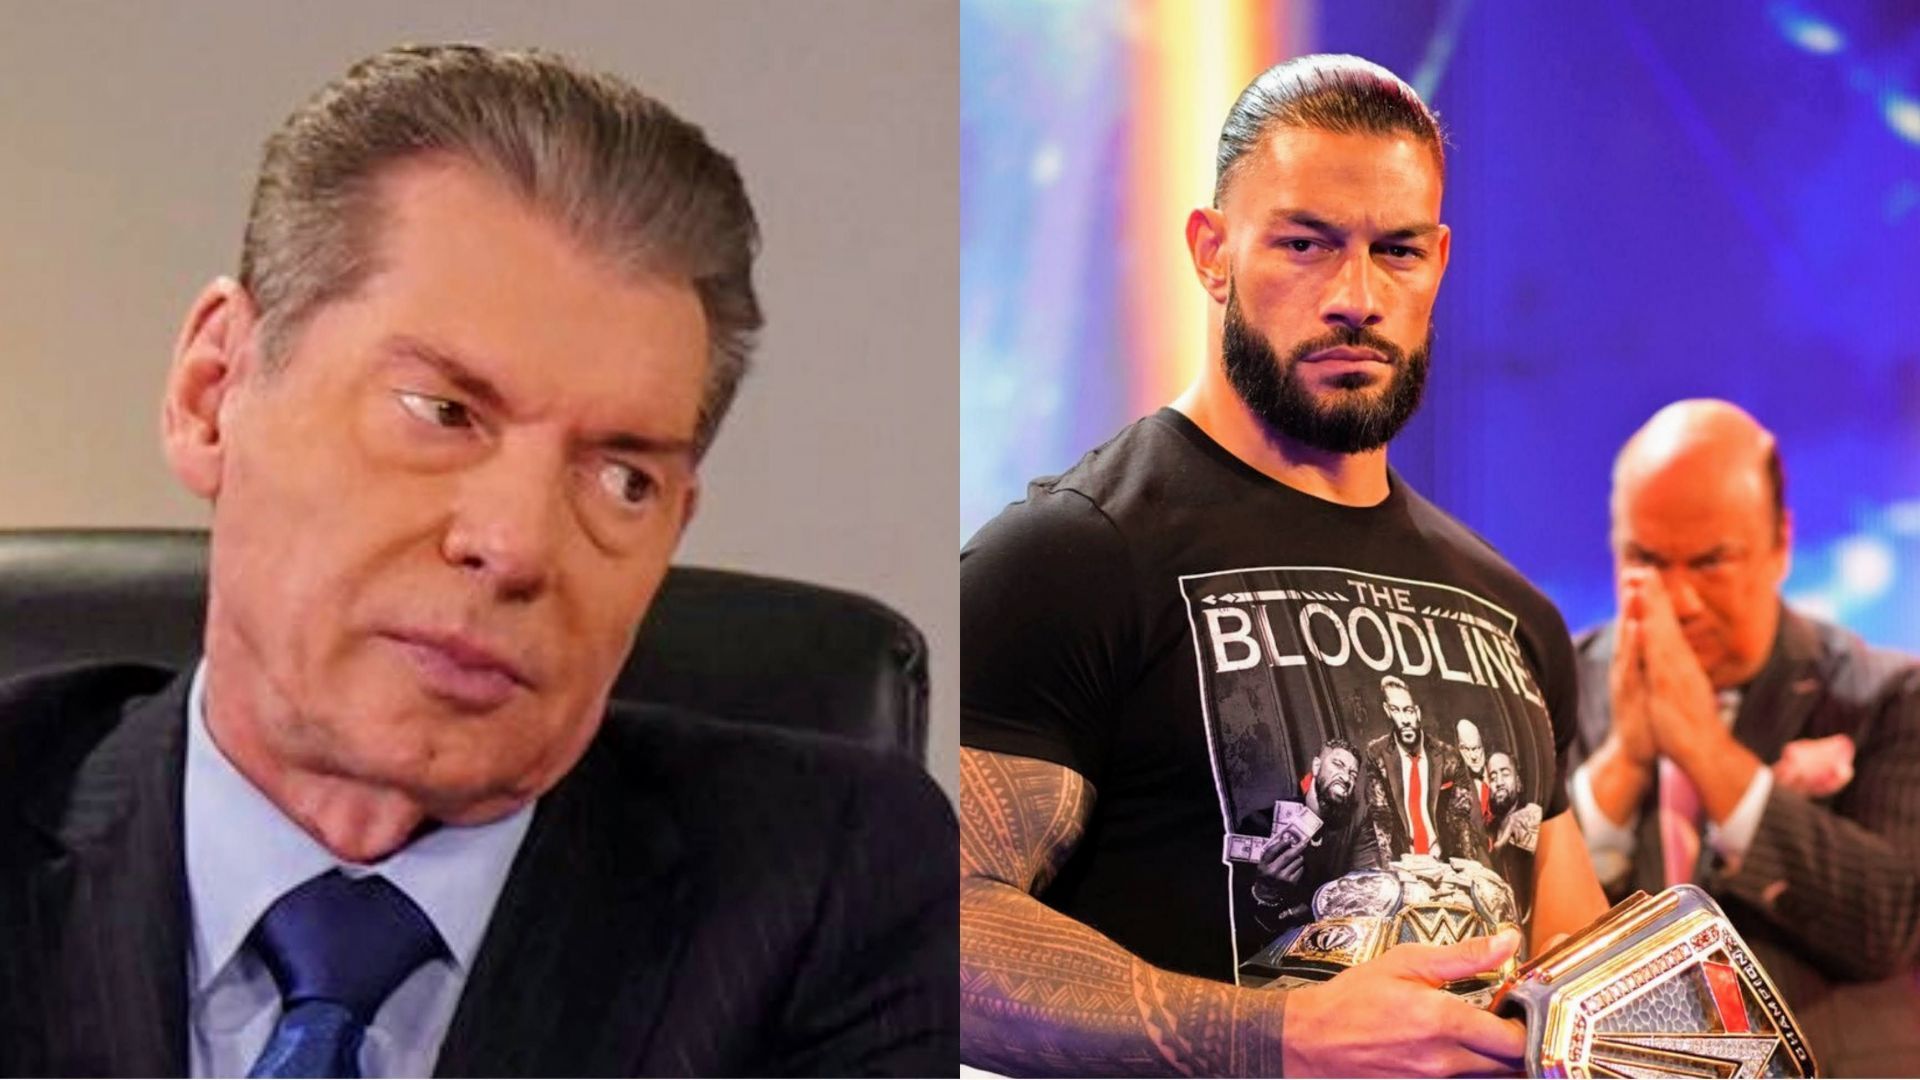 Vince McMahon (left); Roman Reigns and Paul Heyman (right)